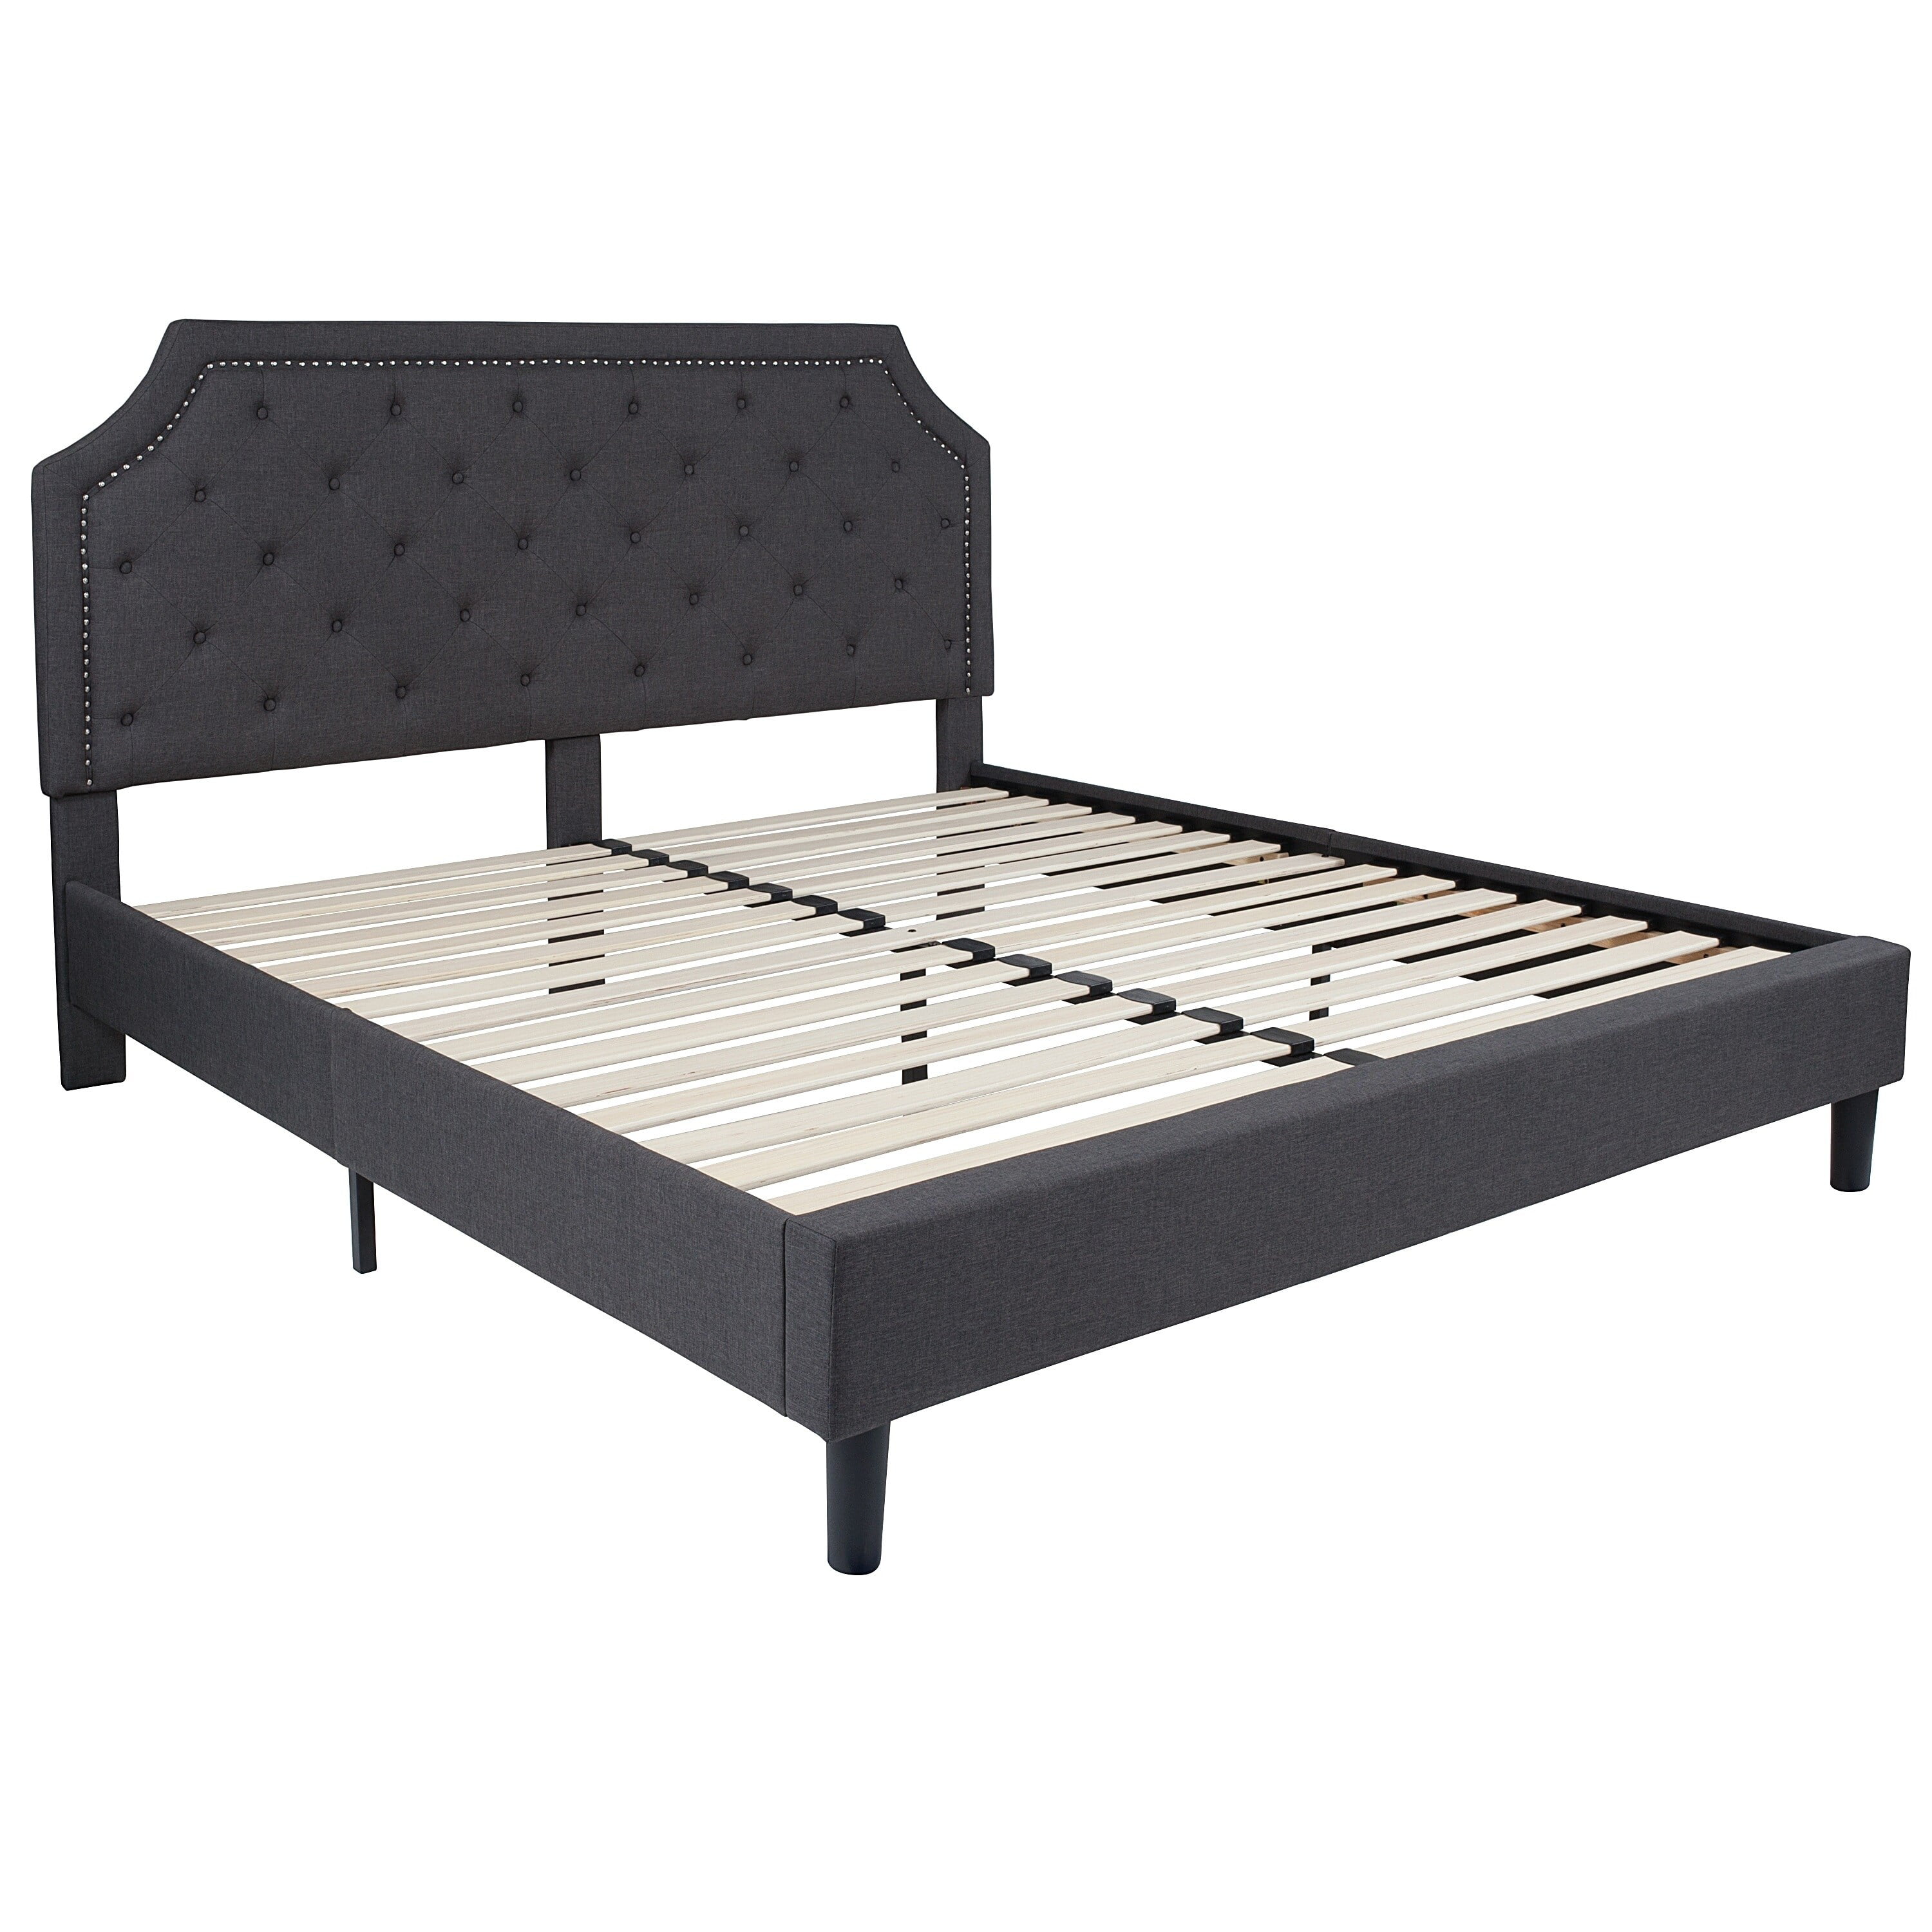 Bsd National Supplies Inc Reno King, King Size Bed With Tufted Headboard